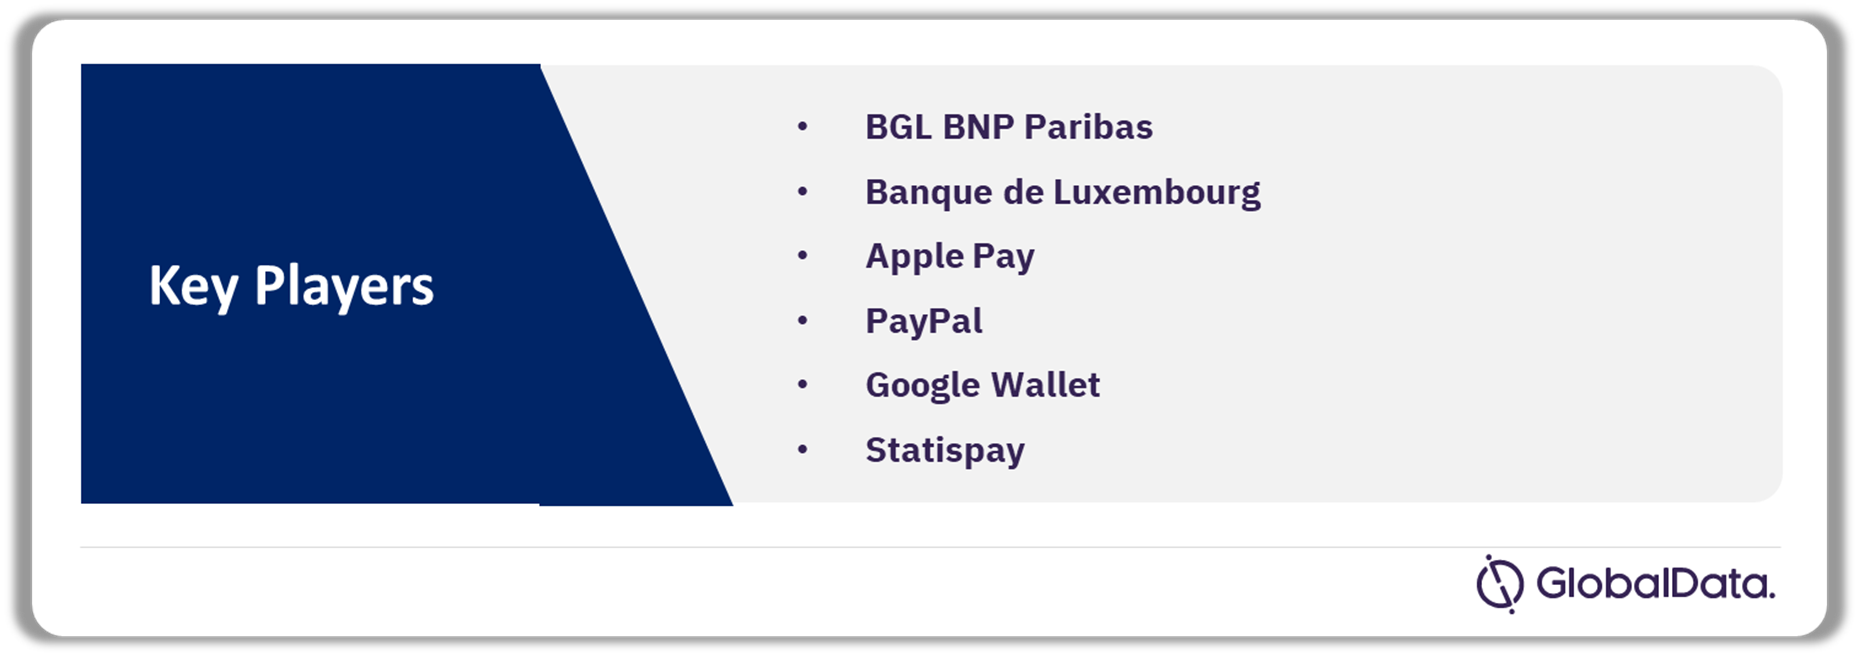 Luxembourg Cards and Payments Market Analysis by Players, 2023